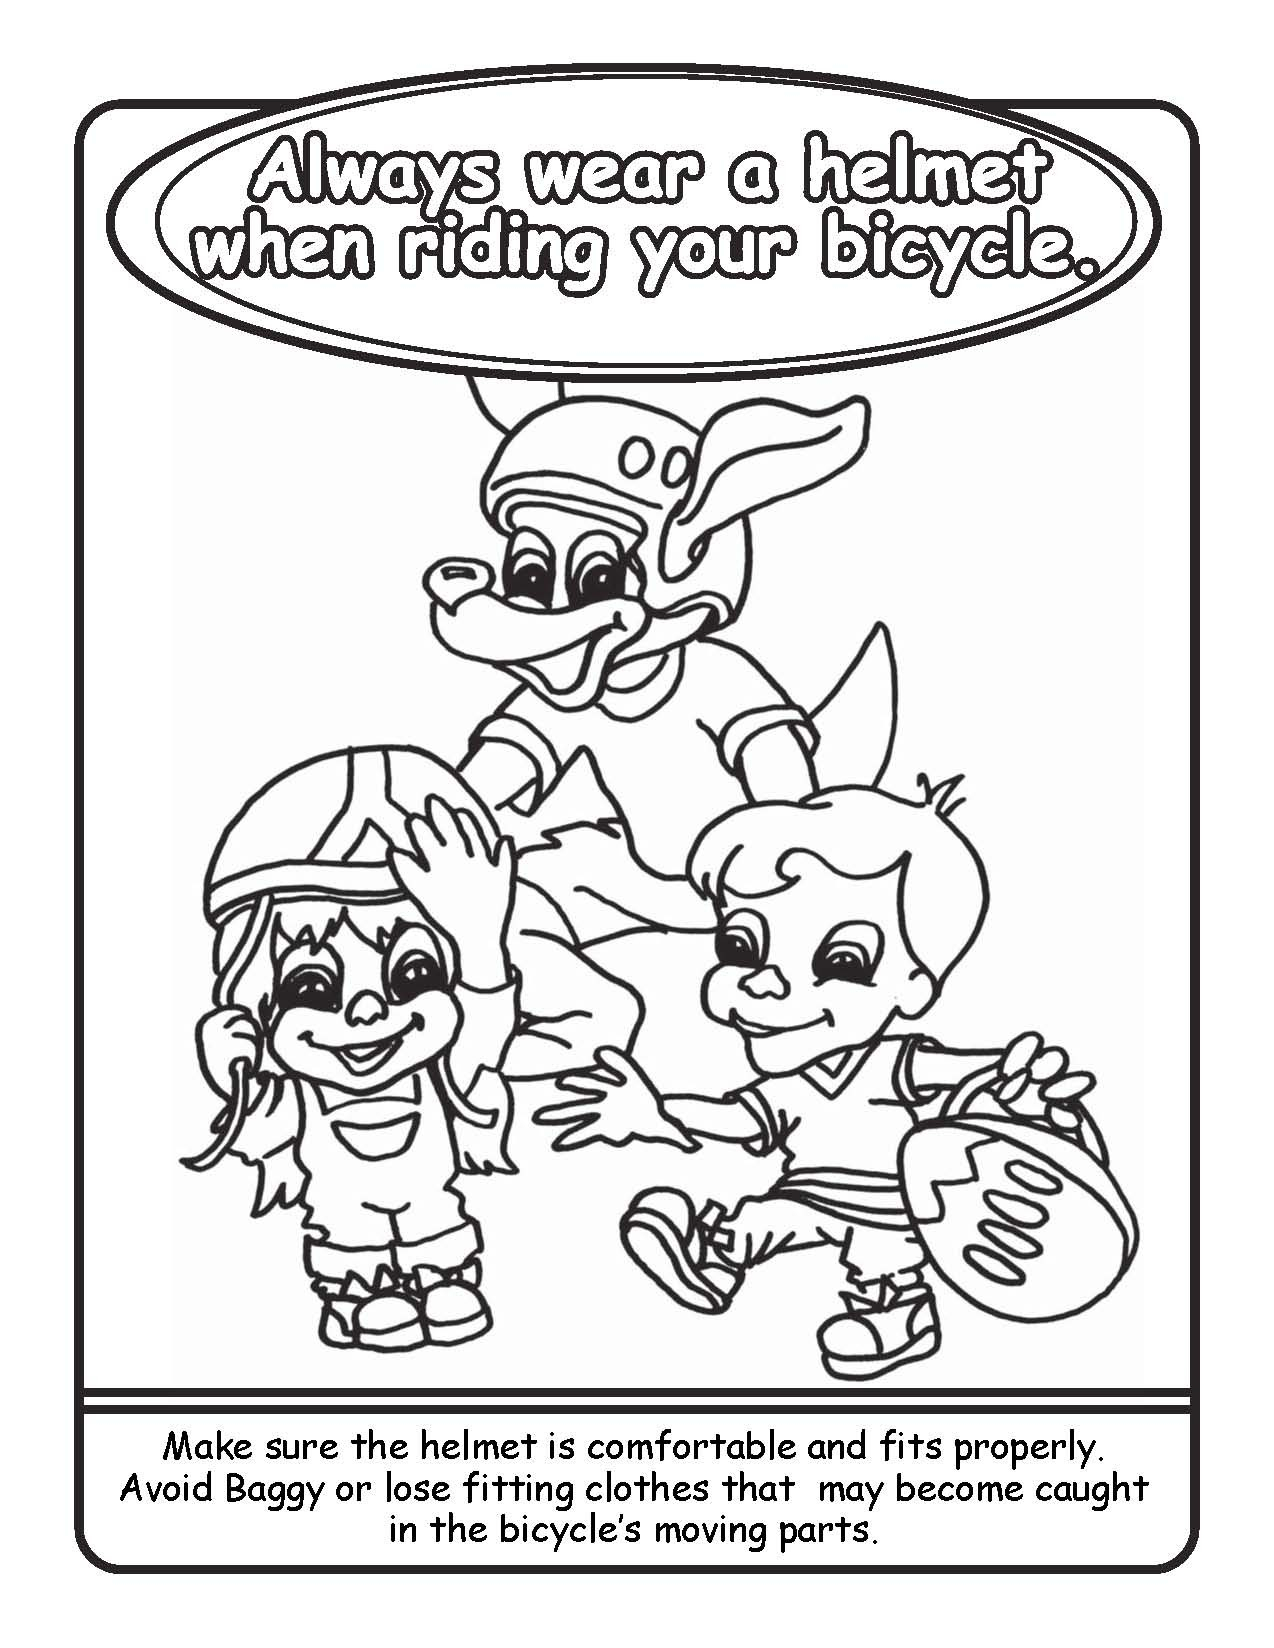 Bike Helmet Coloring Page Remarkable Bike Helmet Coloring Page Valid Pages Bicycle Safety For